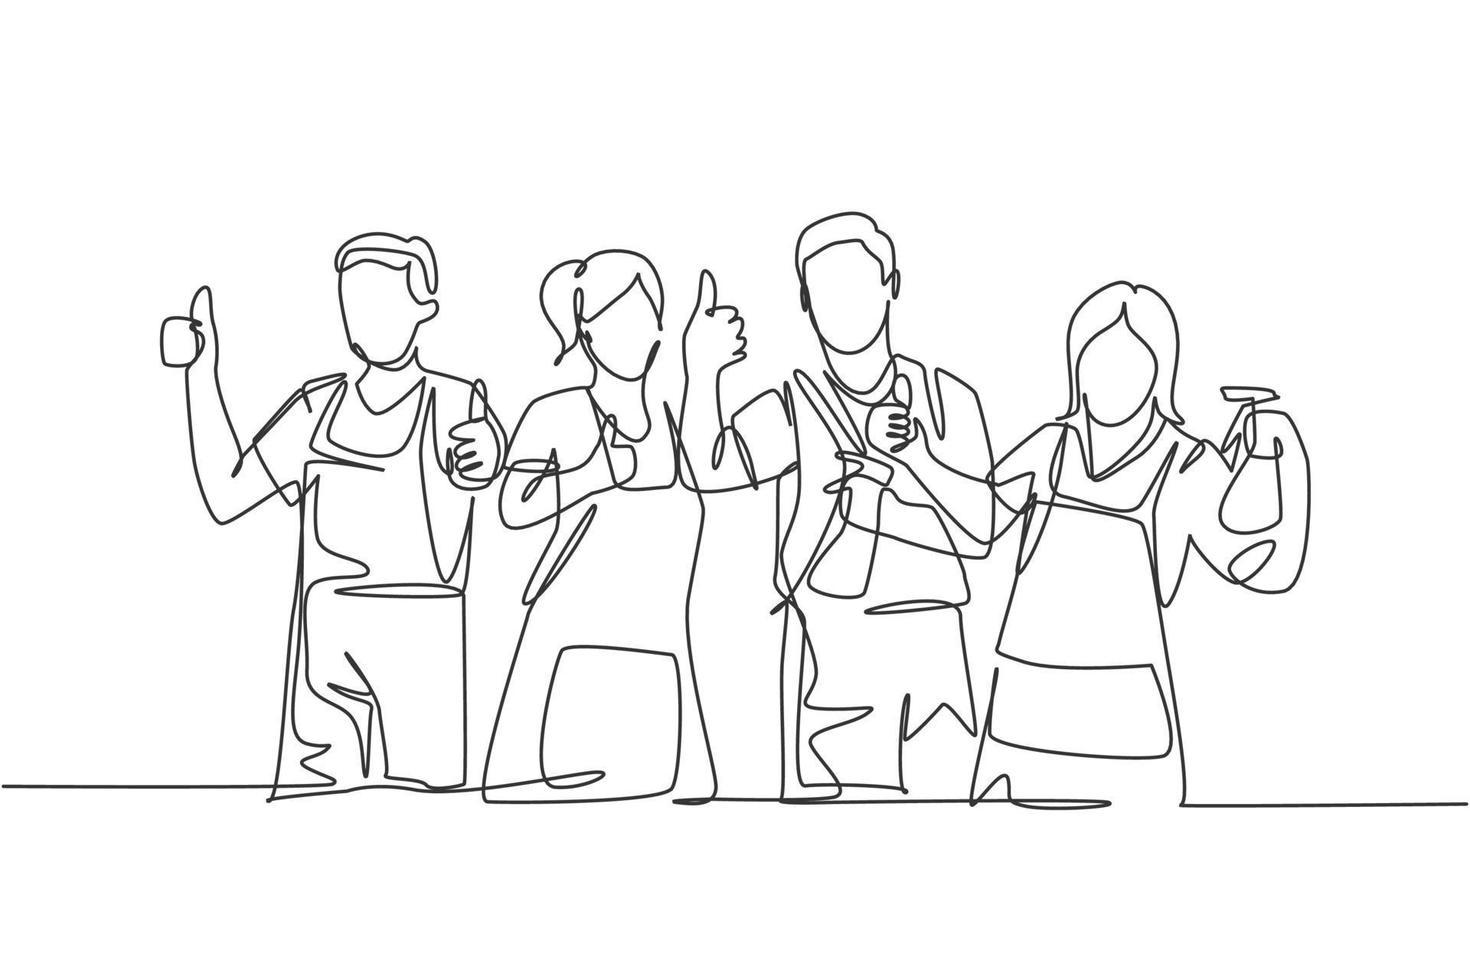 One line drawing of groups of group male and female janitor giving thumbs up gesture. Cleaning service teamwork concept. Continuous line draw design vector illustration